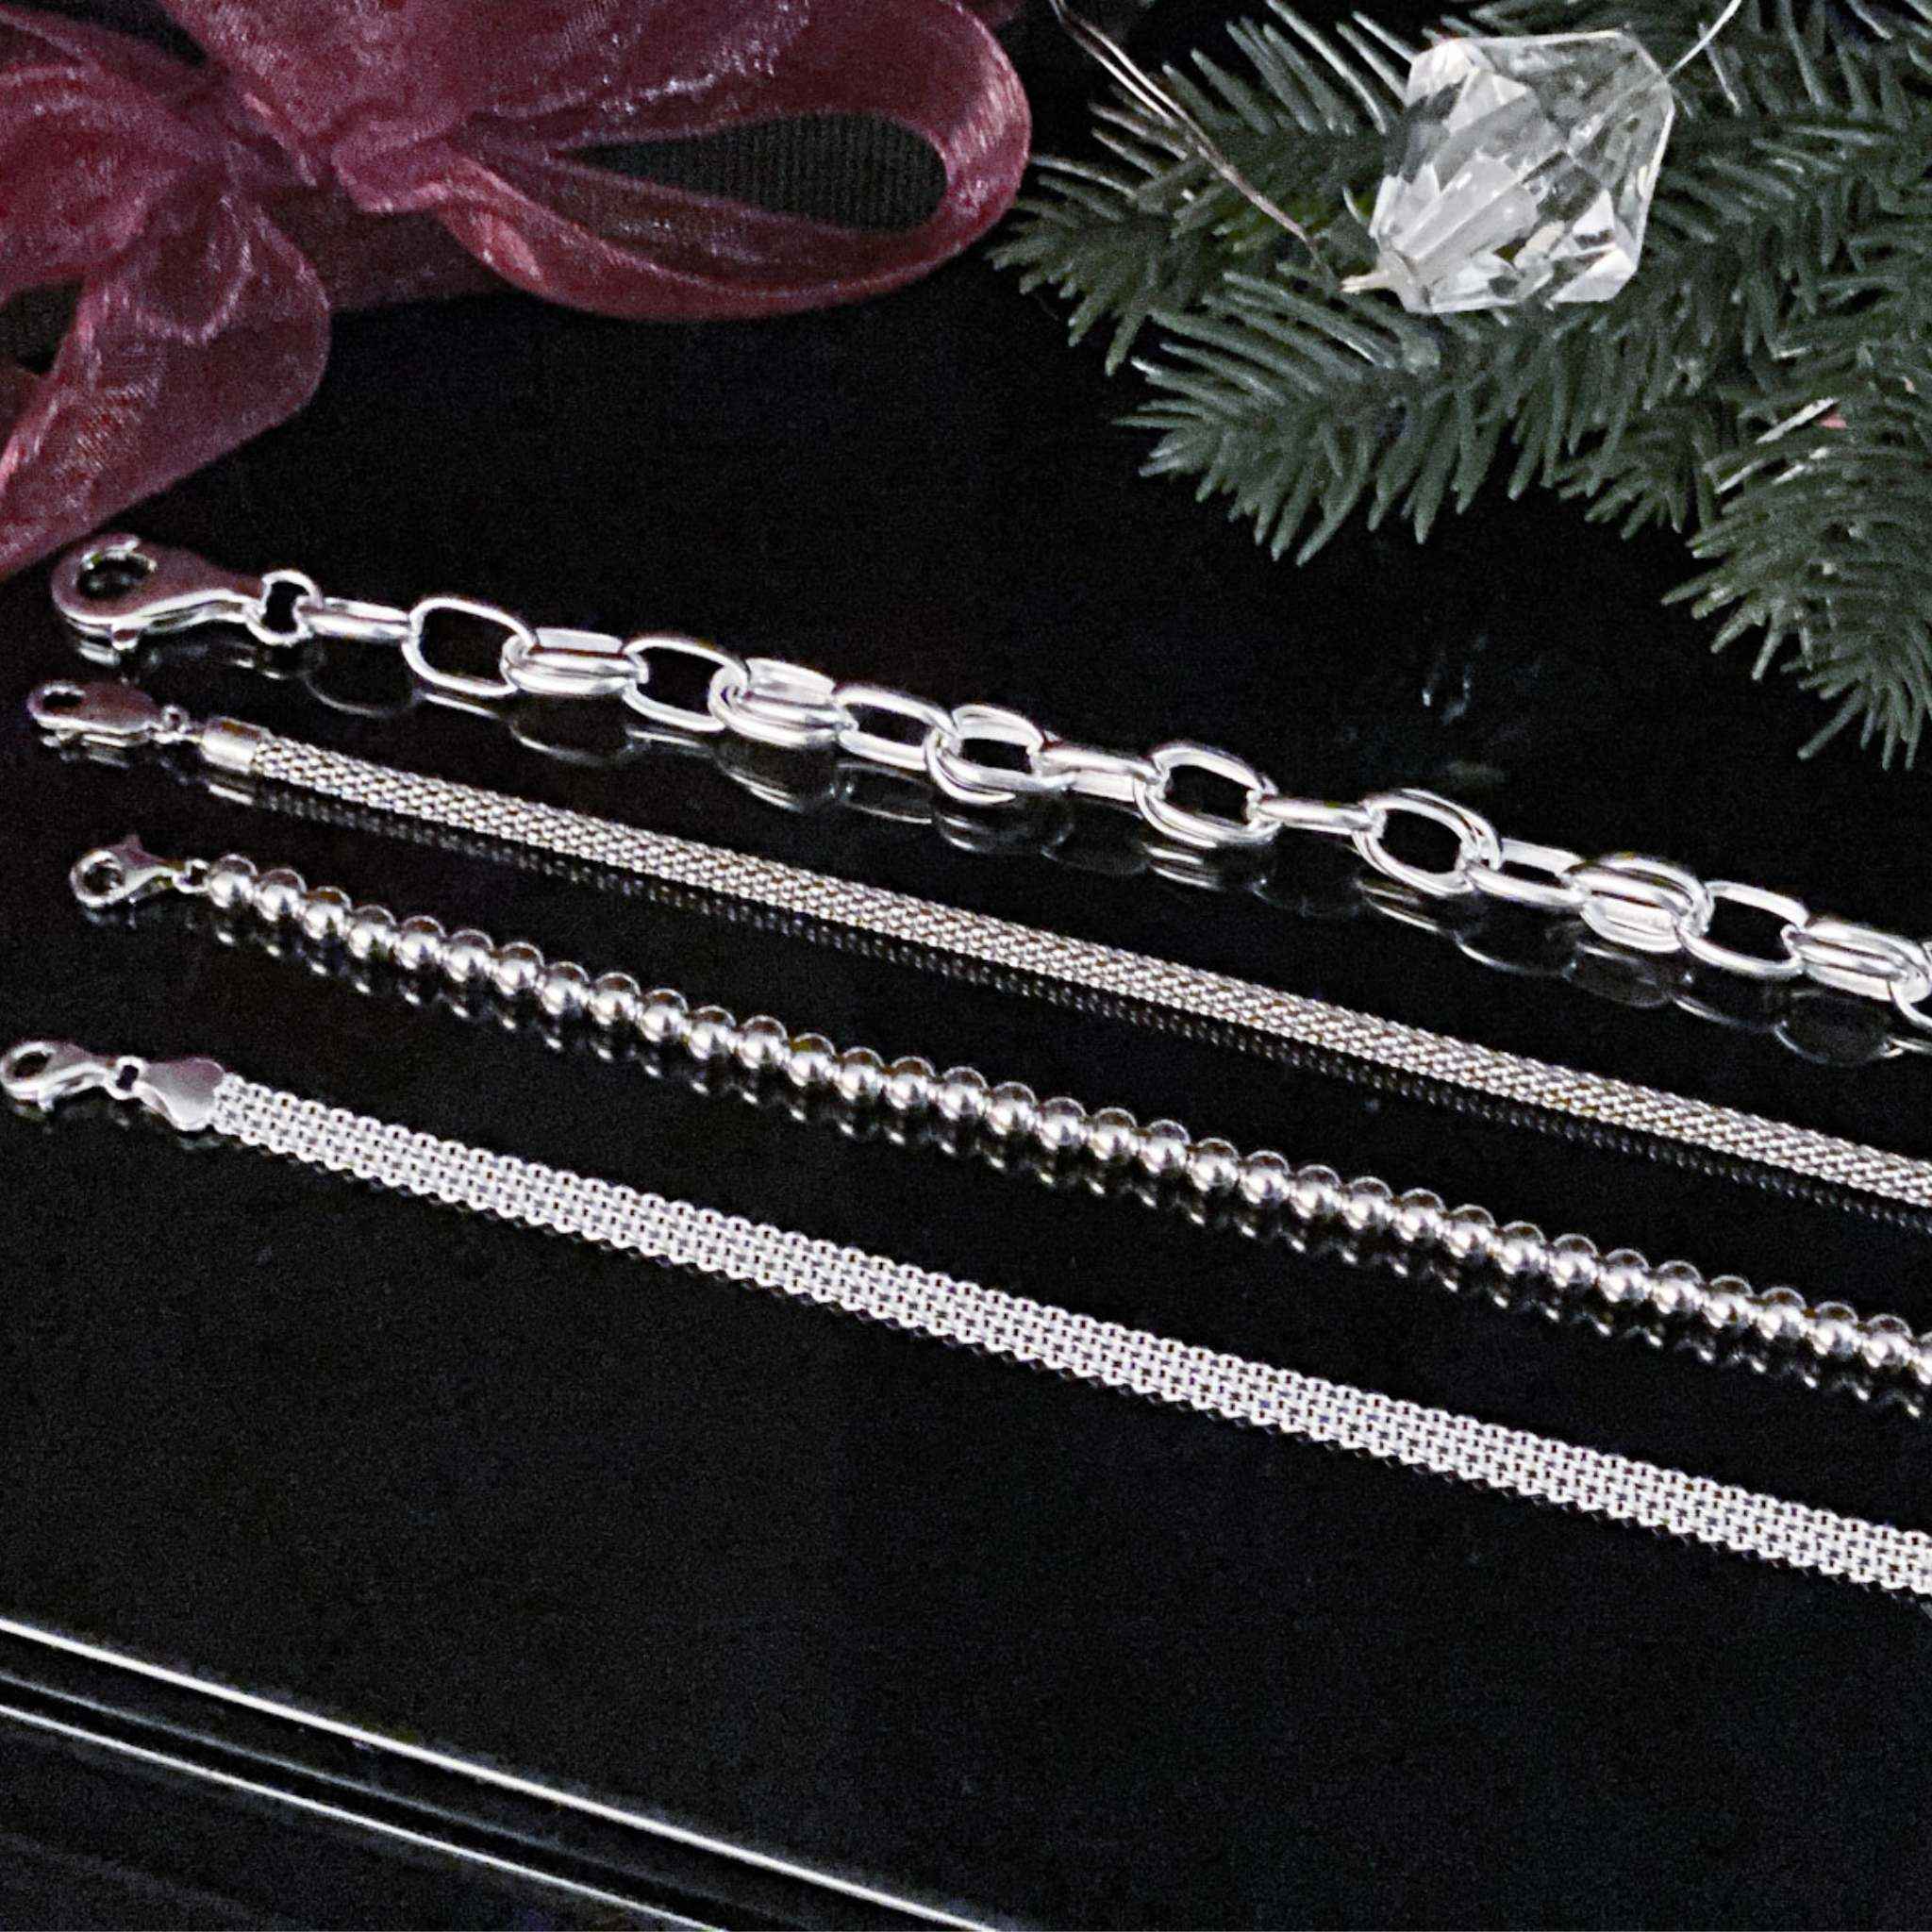 Close-up view of sterling silver rope bracelet detailing.